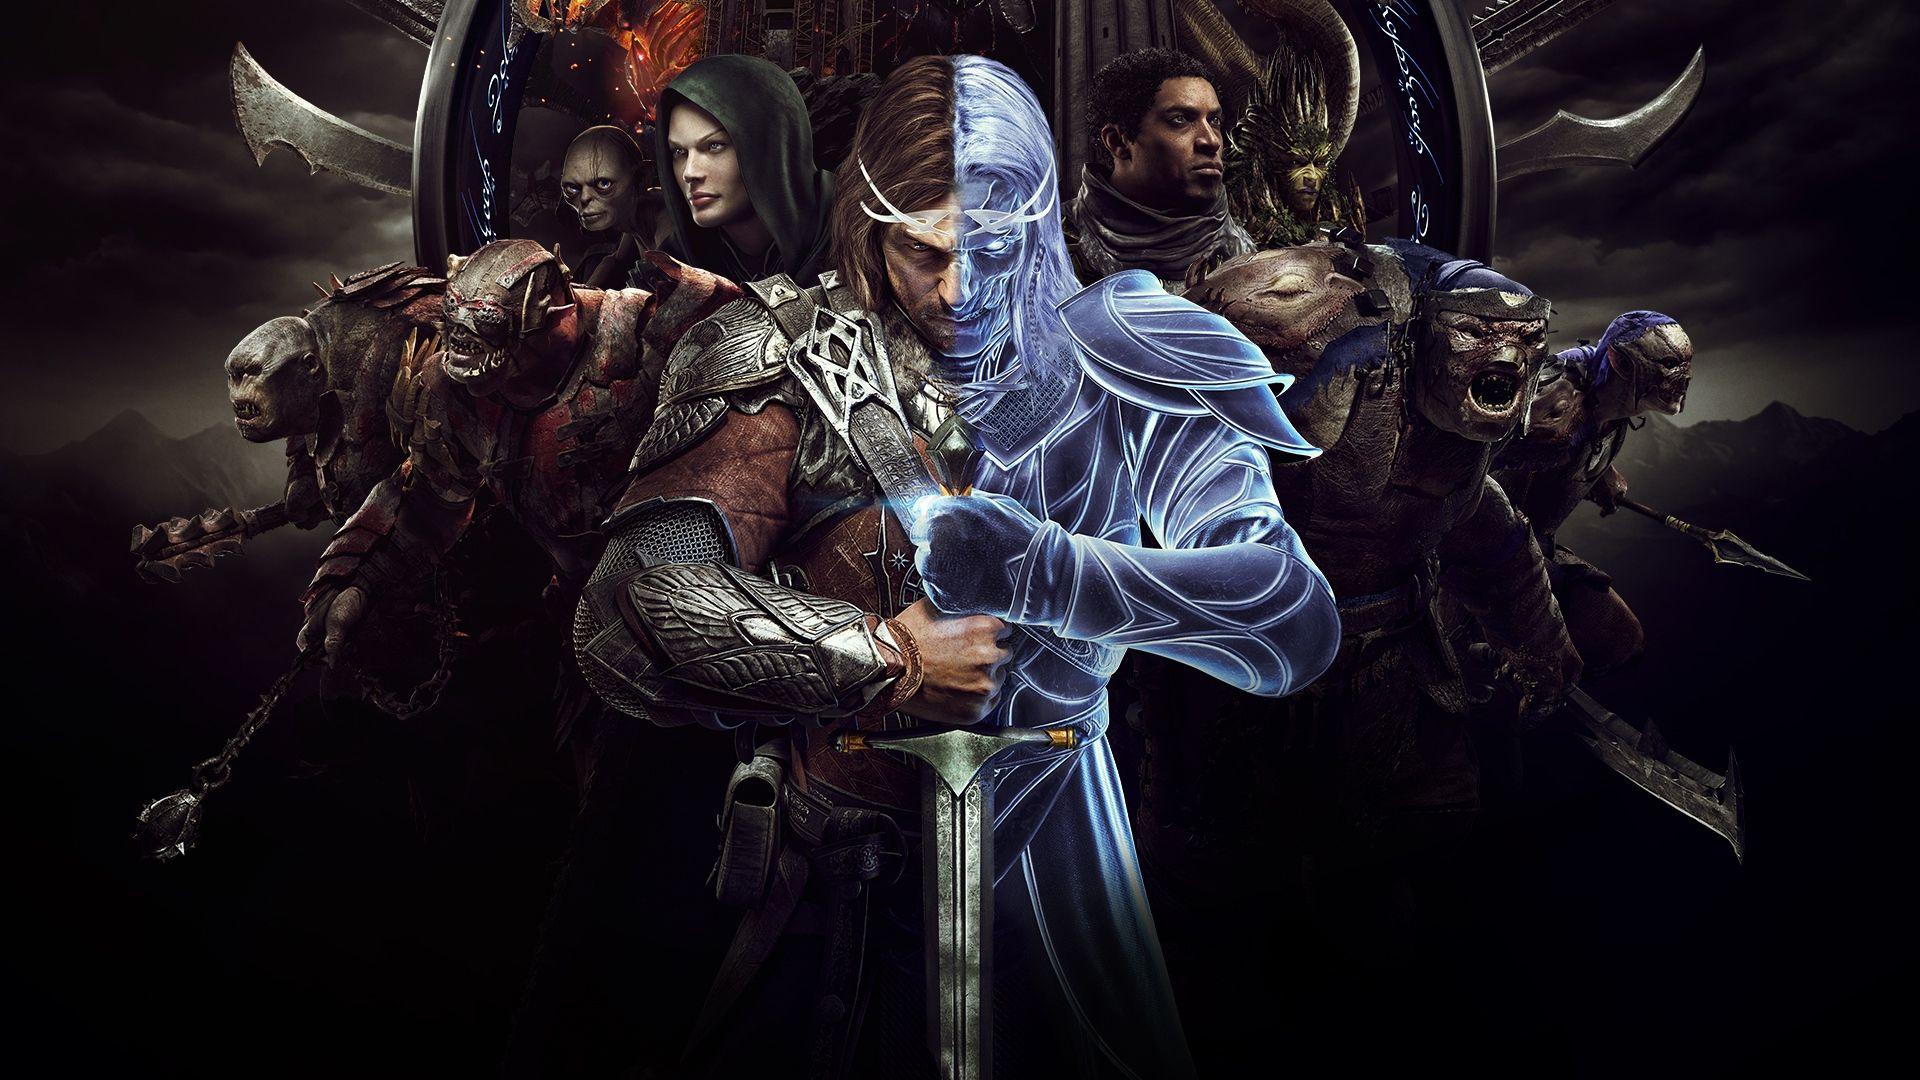 Shadow of War Wallpapers - Top Free Shadow of War Backgrounds